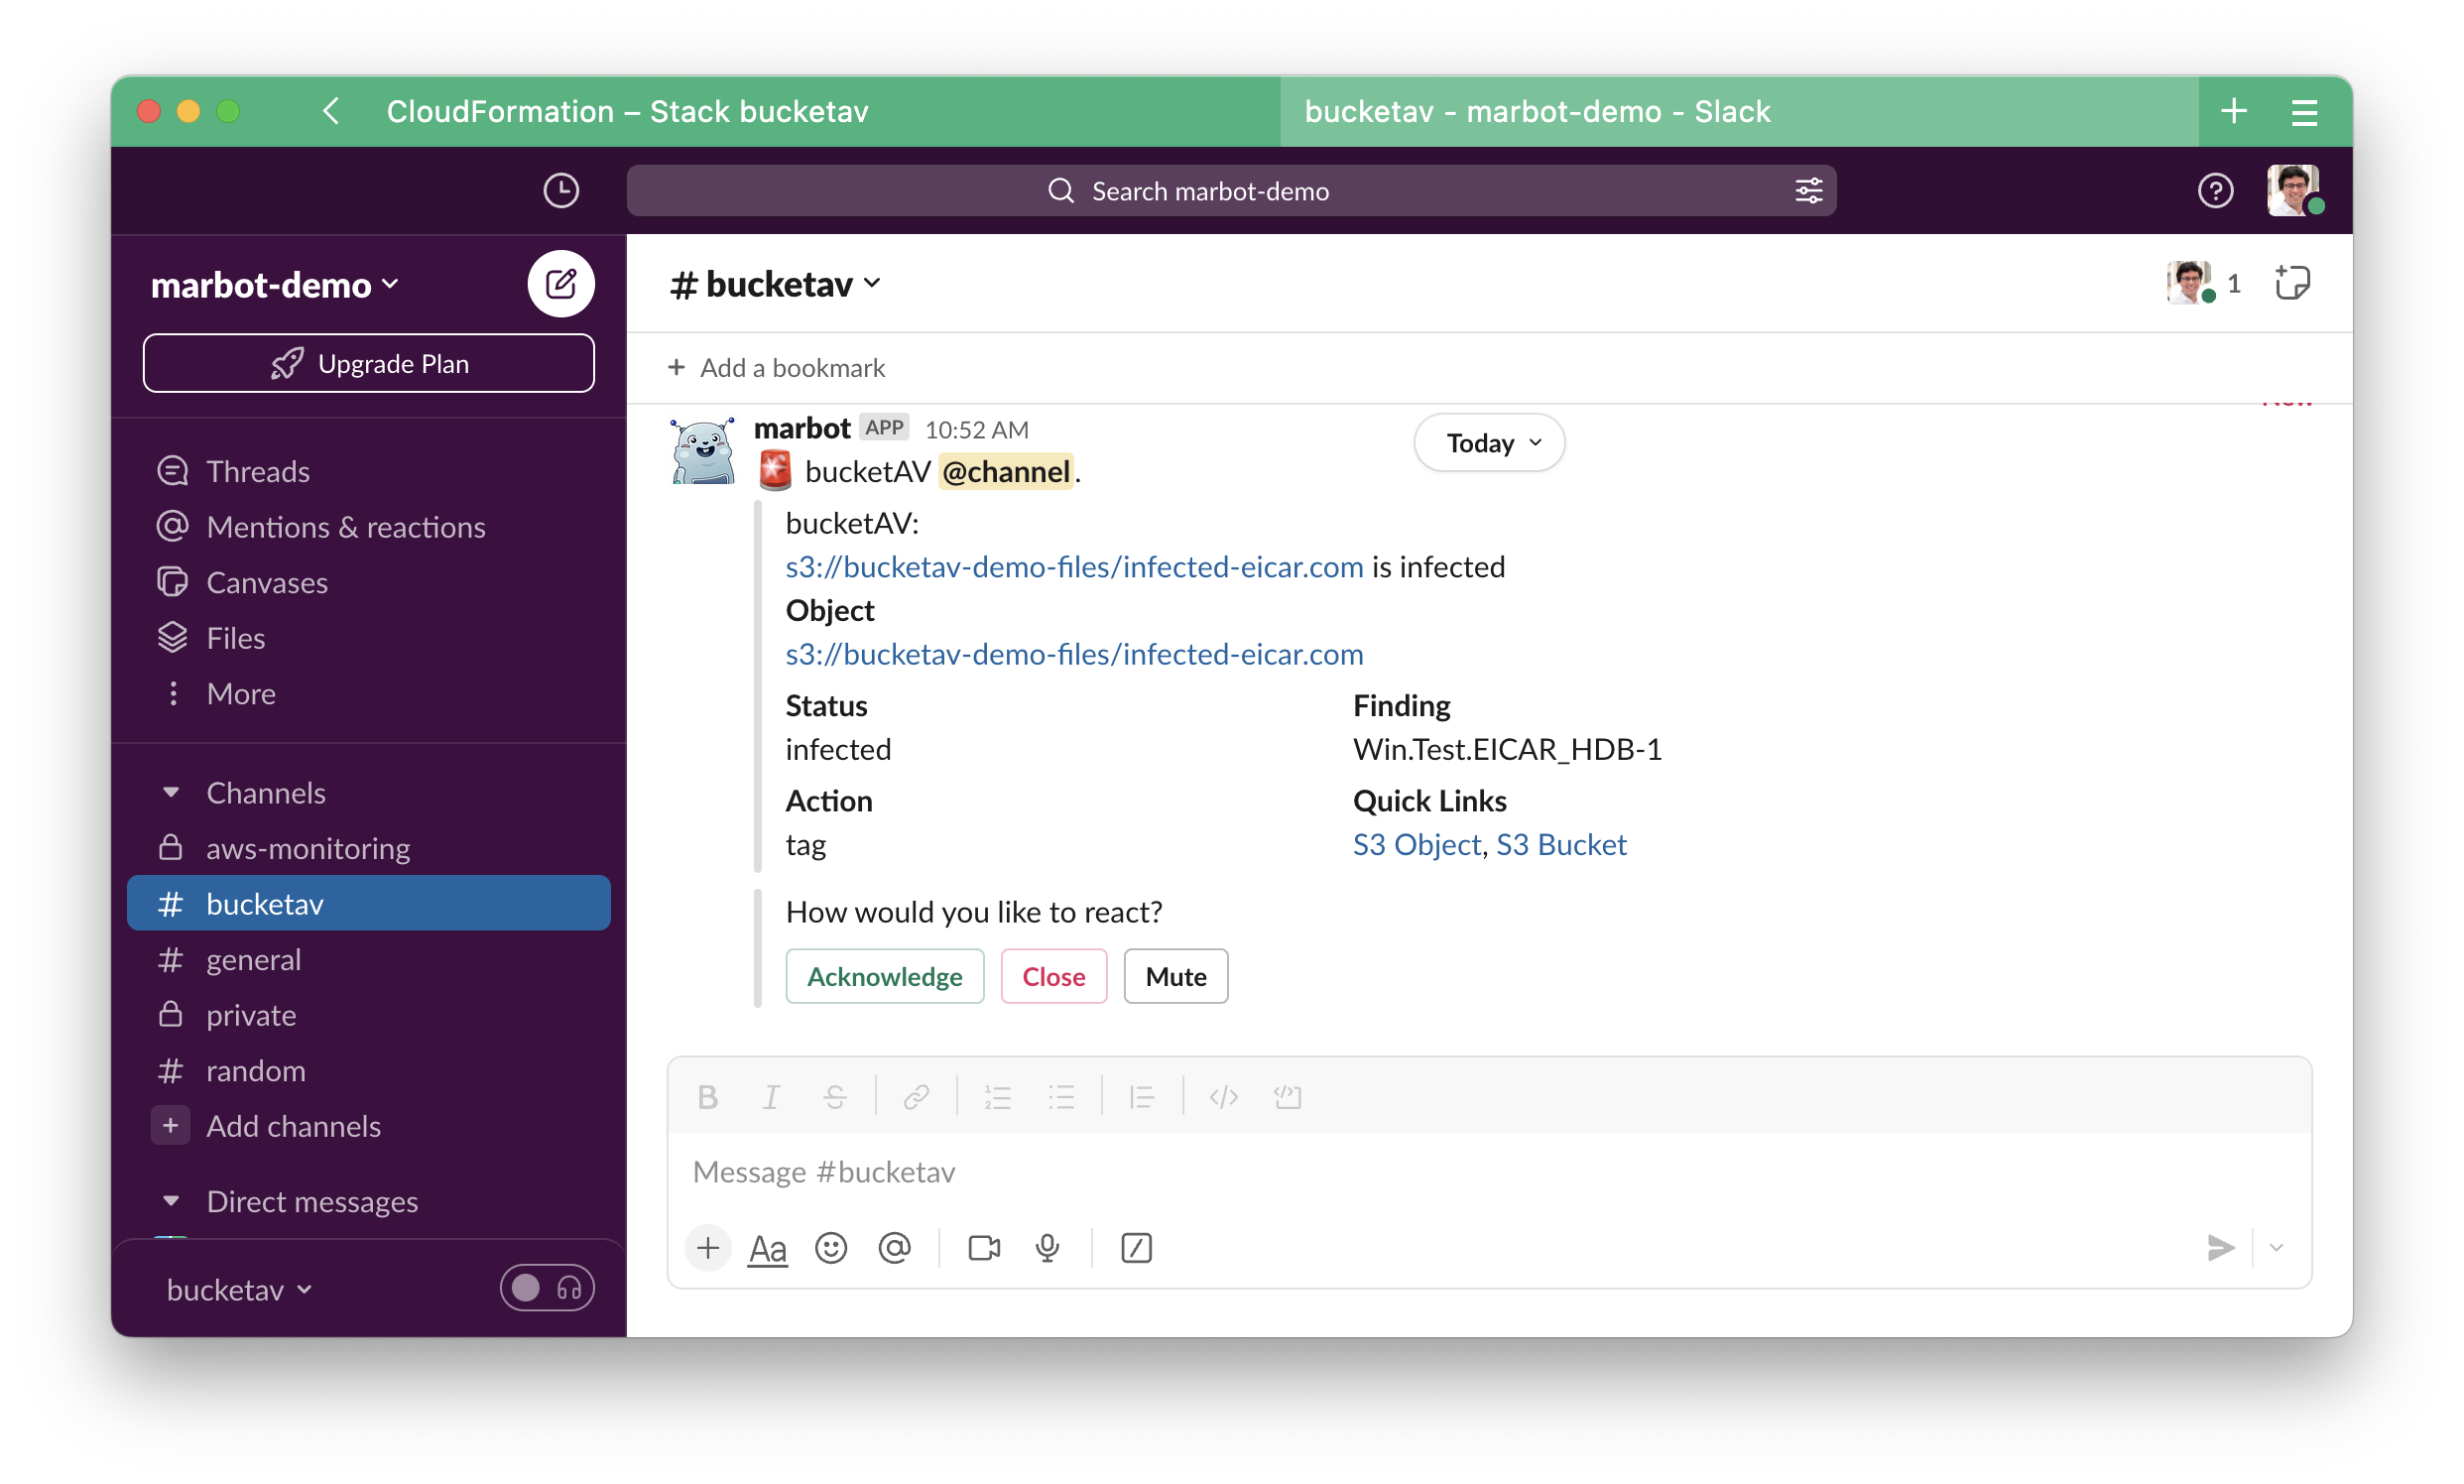 bucketAV notification about infected file in Slack